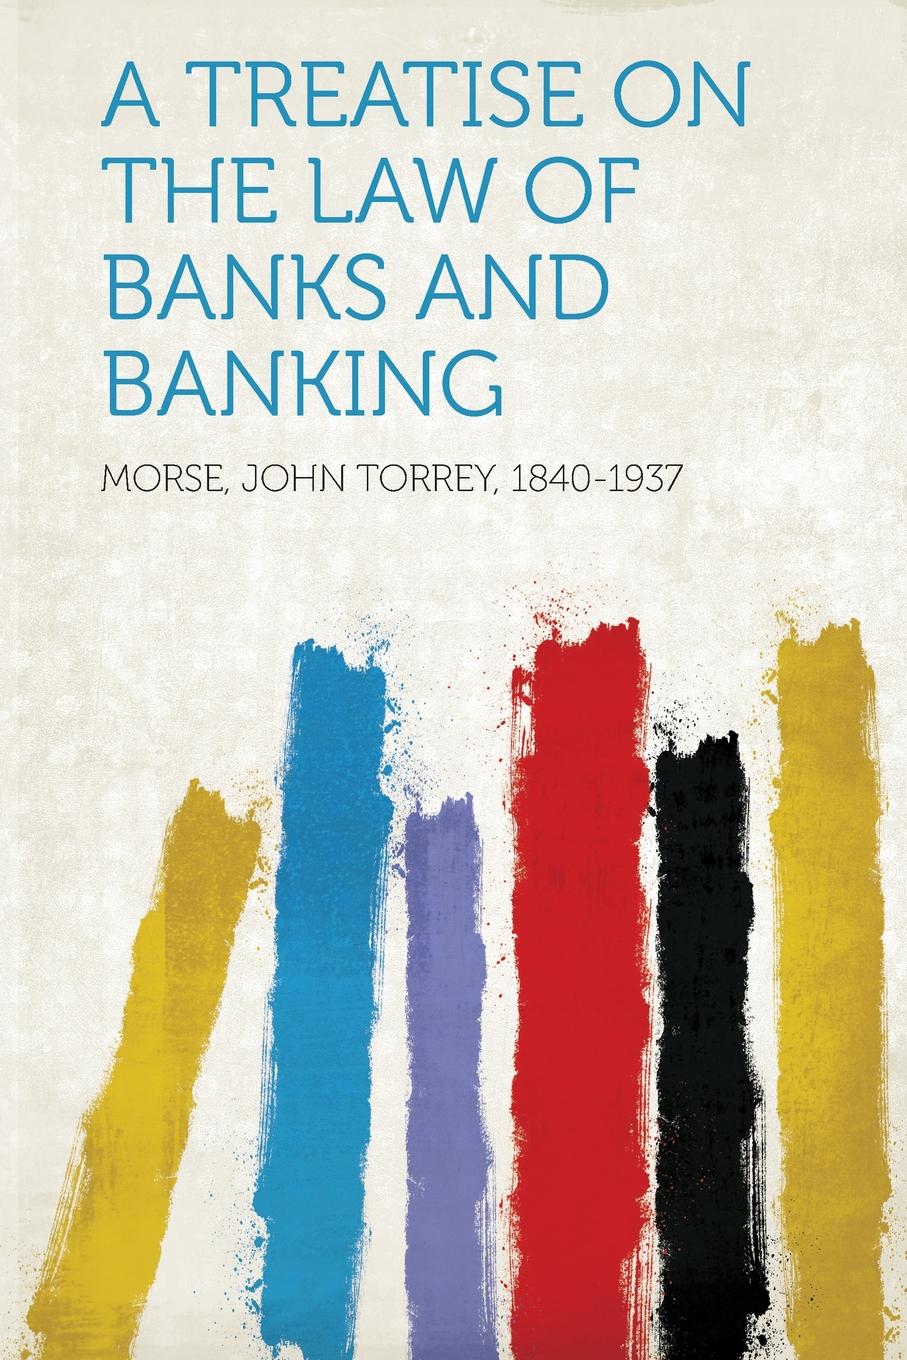 A Treatise on the Law of Banks and Banking